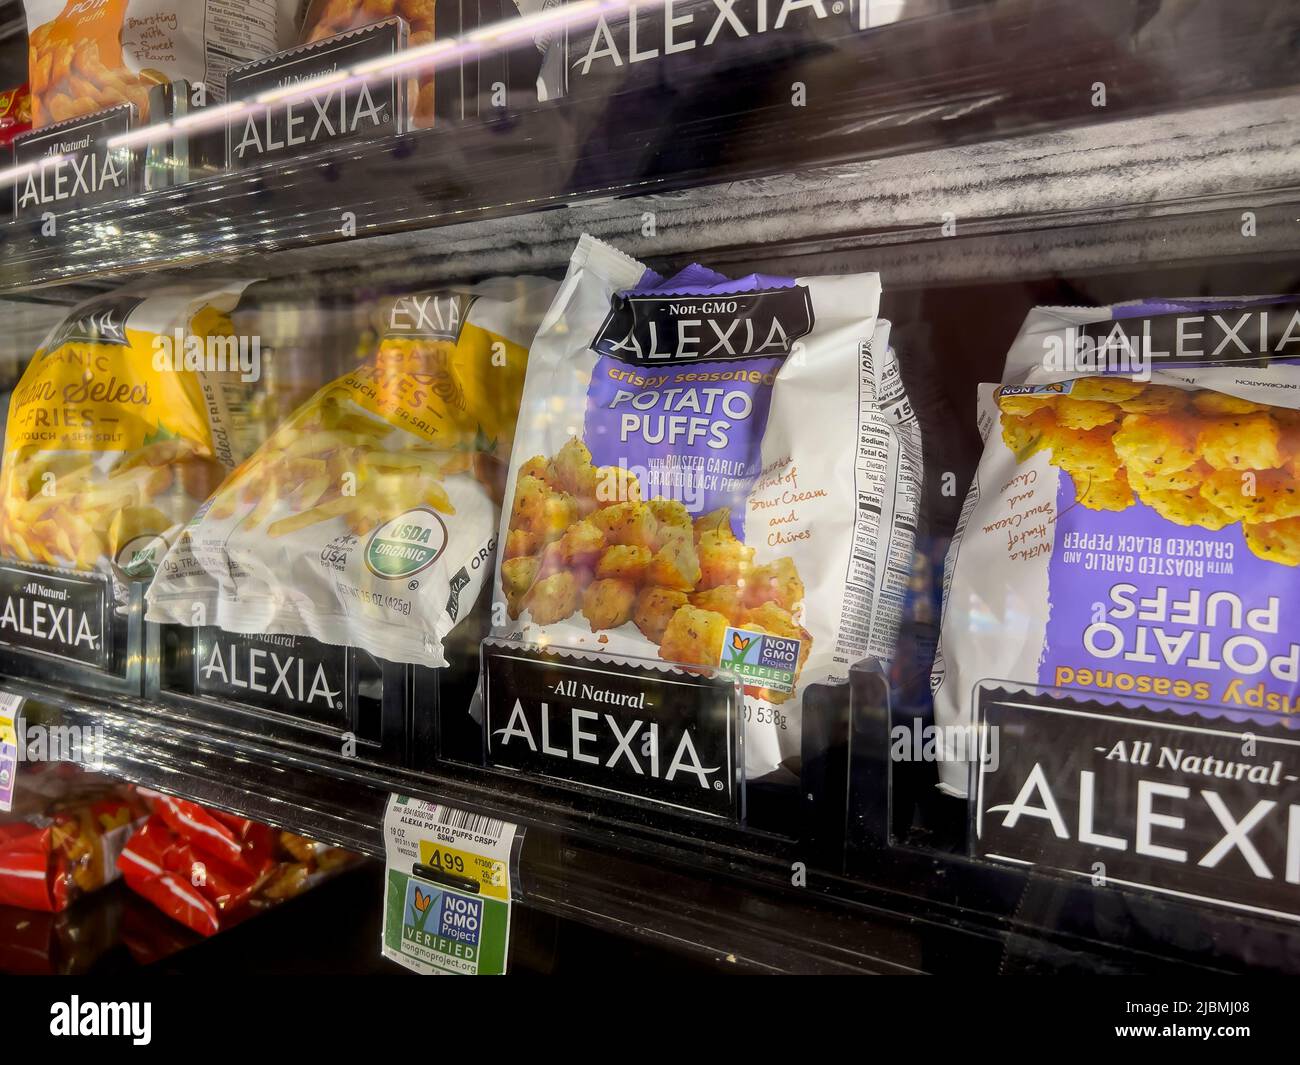 Woodinville, WA USA - circa May 2022: Angled view of Alexia brand potatoes for sale inside the freezer section of a Haggen grocery store. Stock Photo